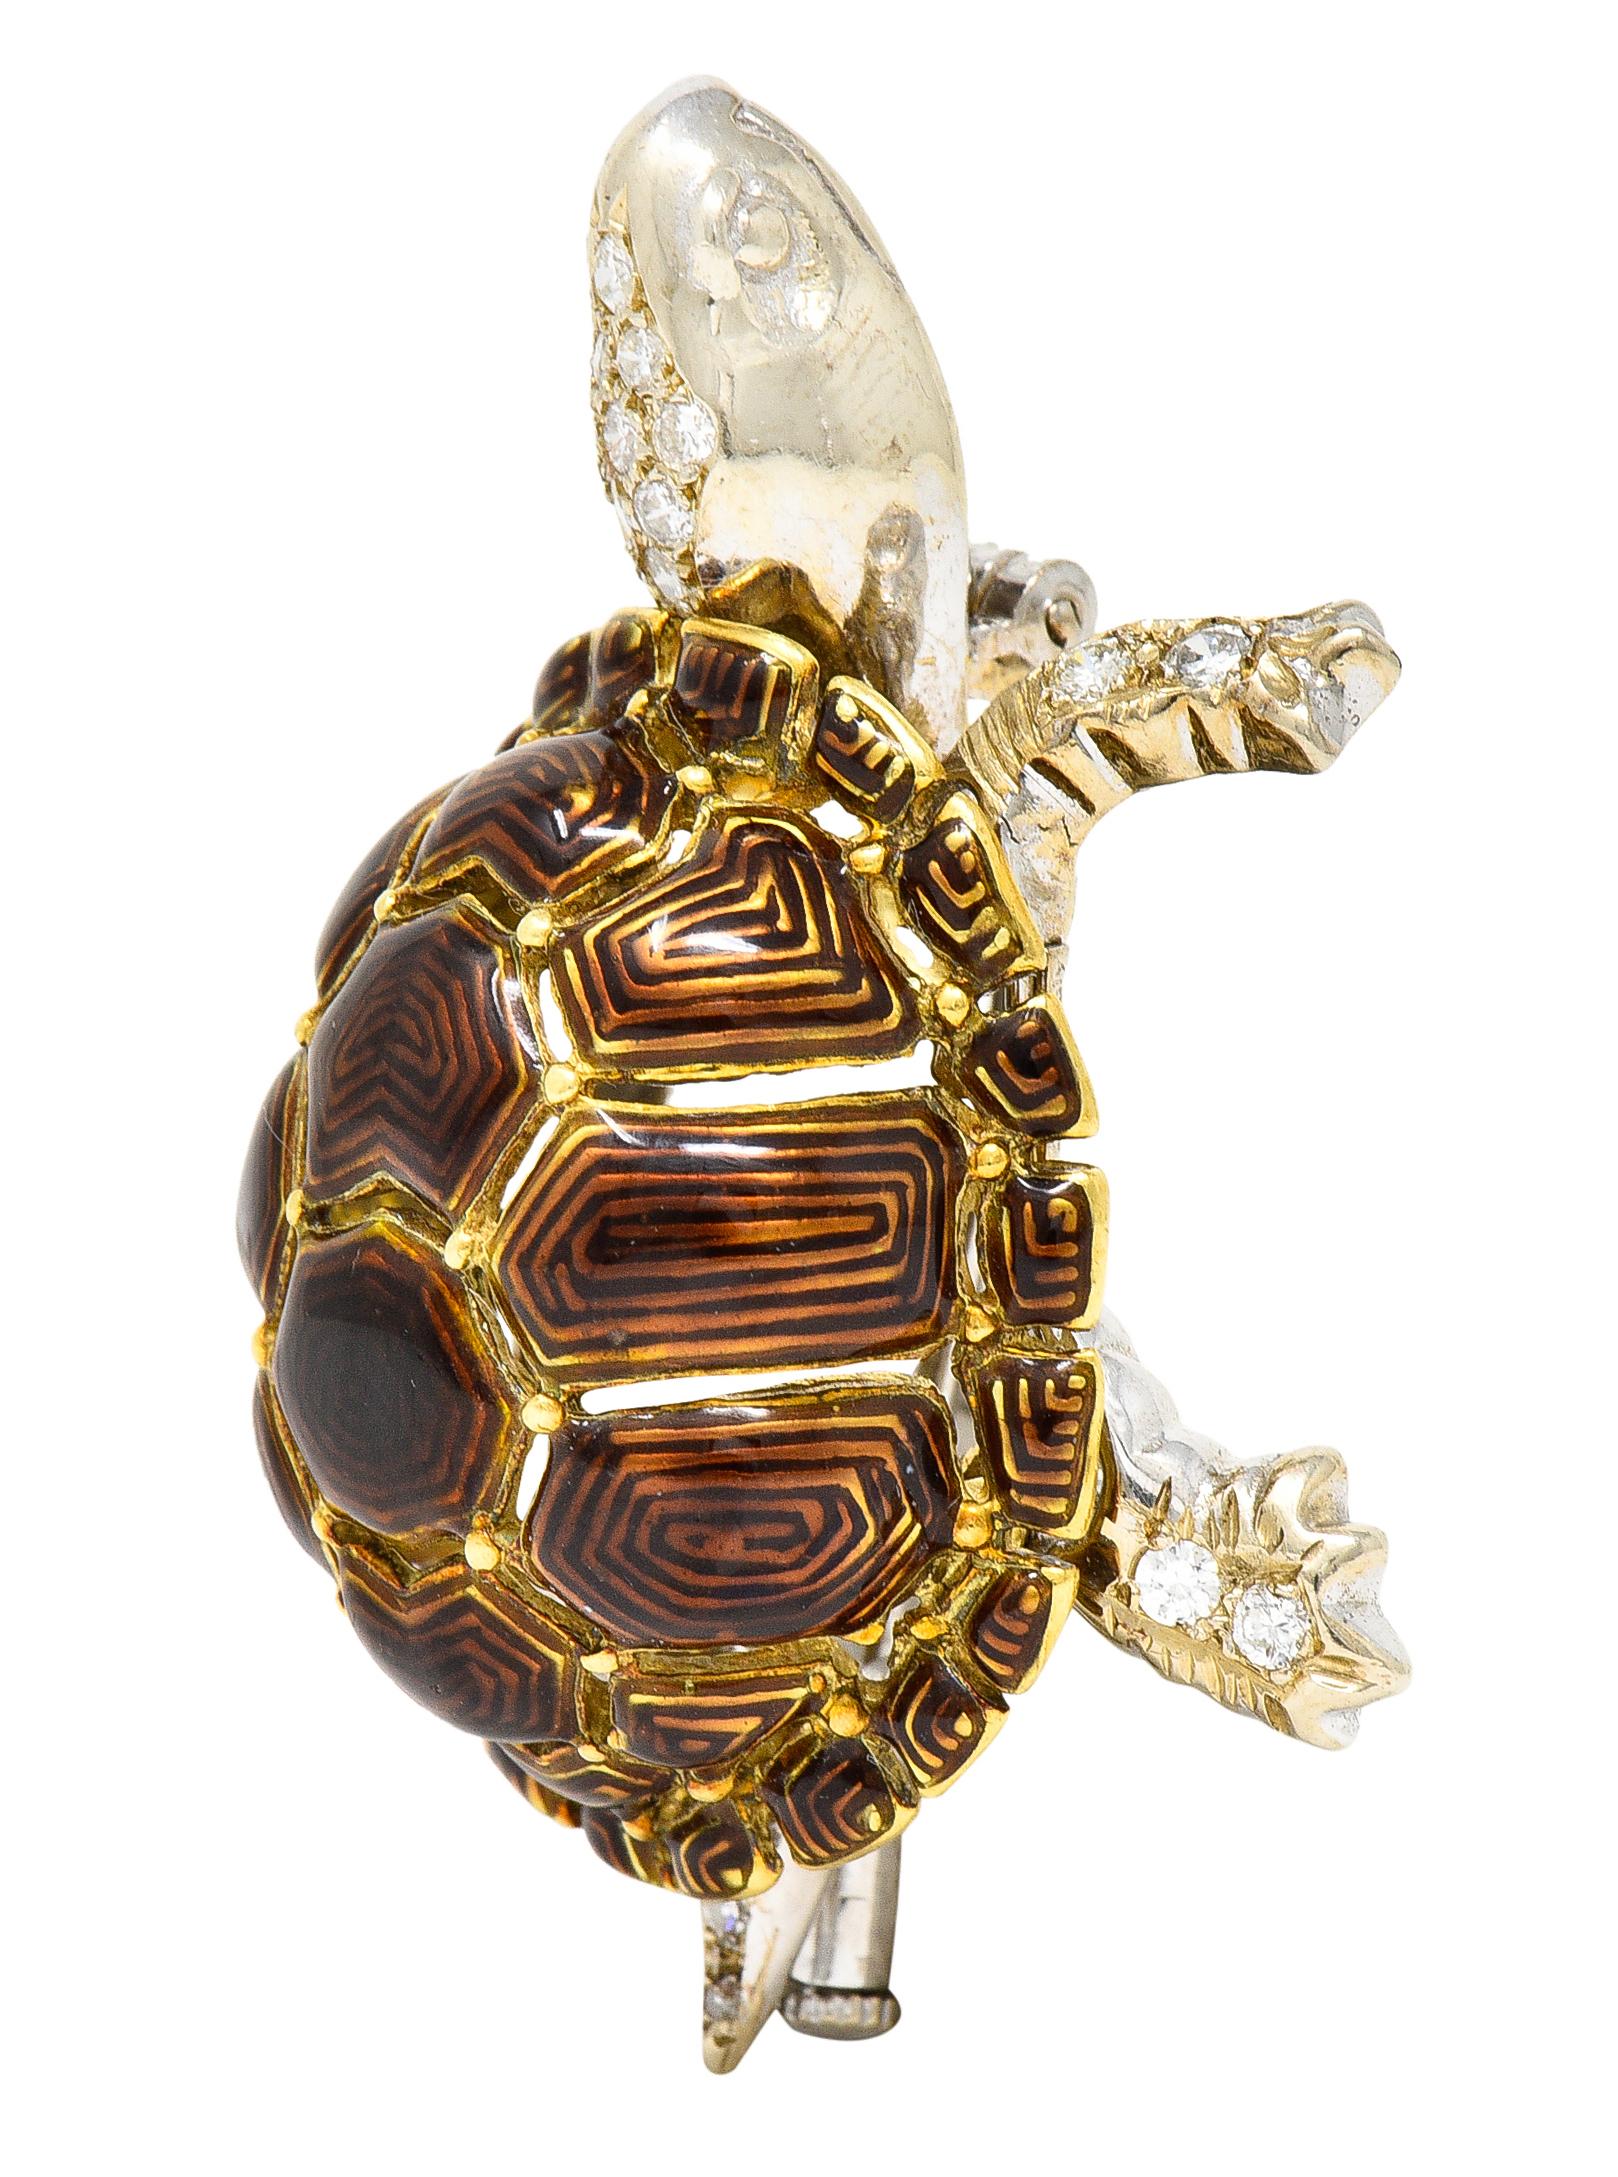 Brooch is designed as a tortoise turtle with a highly domed and tessellated shell. Yellow gold with a deeply grooved design - glossed with brownish orange enamel. Head and limbs are white gold and accented by round brilliant cut diamonds. Weighing